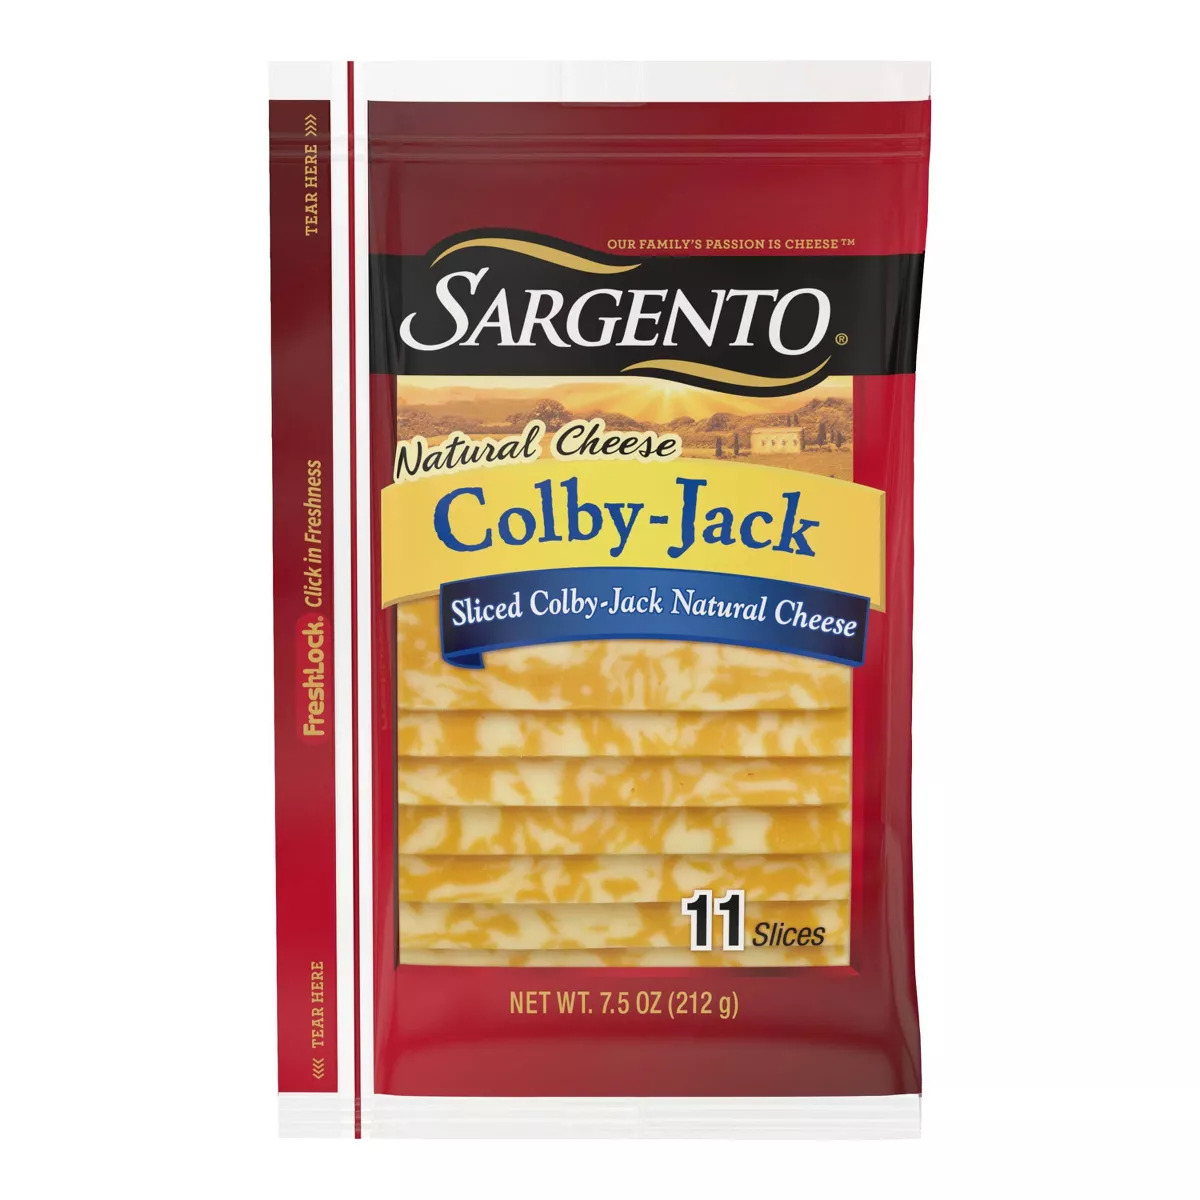 Sargento, Sargento® Sliced Colby-Jack Natural Cheese, 11 slices